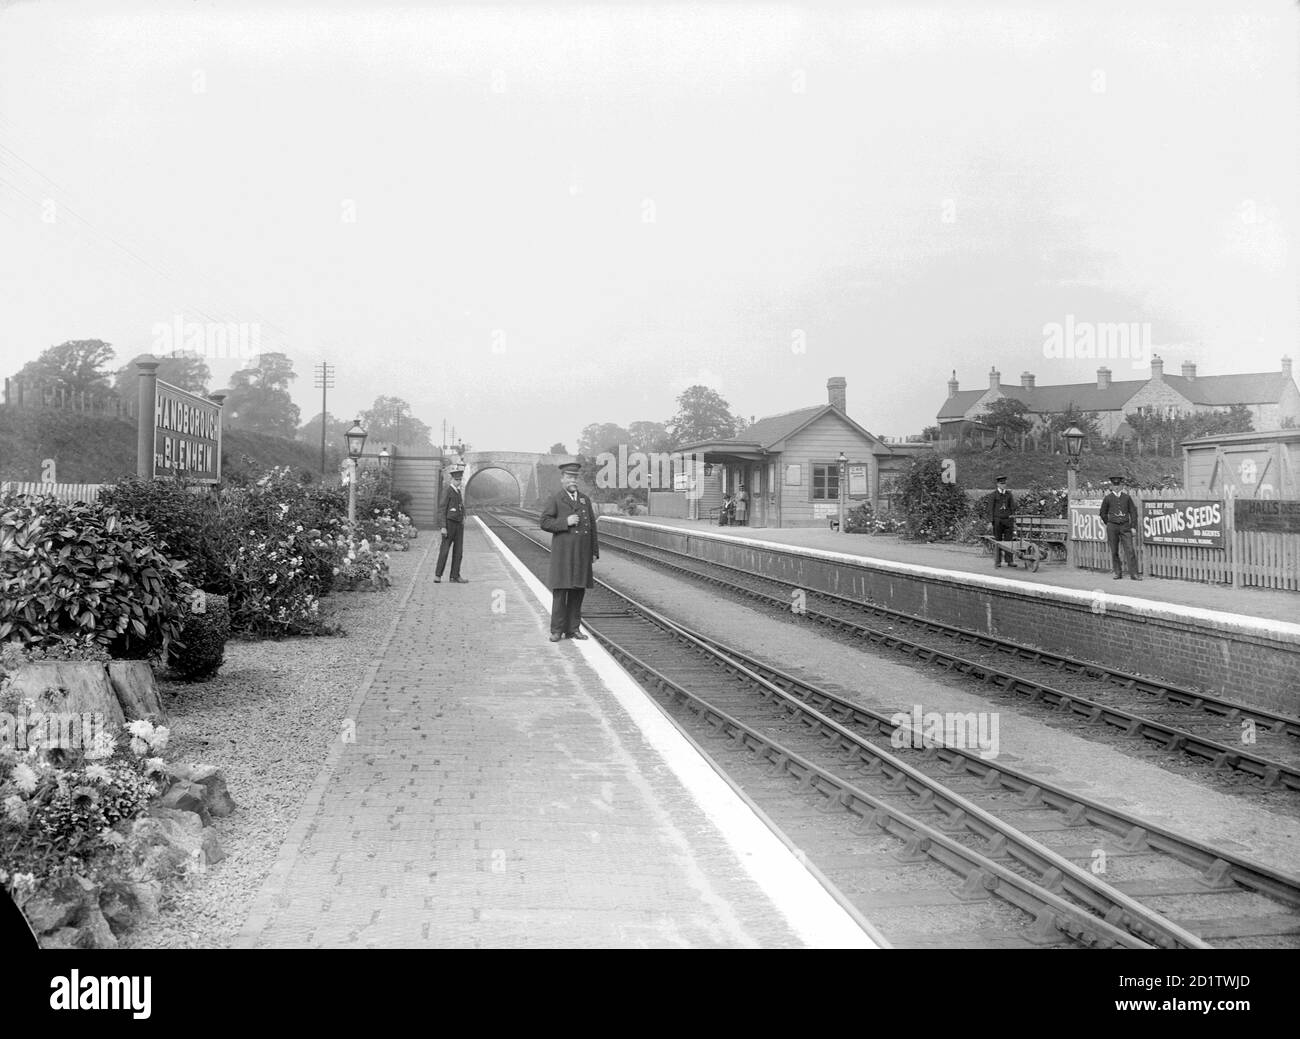 LONG HANBOROUGH RAILWAY STATION, West Oxfordshire. The Station Master and a guard standing on the platform of the small station, with a railway bridge visible in the background. A porter with a trolley is standing on the opposite platform. Photographed by Henry Taunt in 1920. Stock Photo